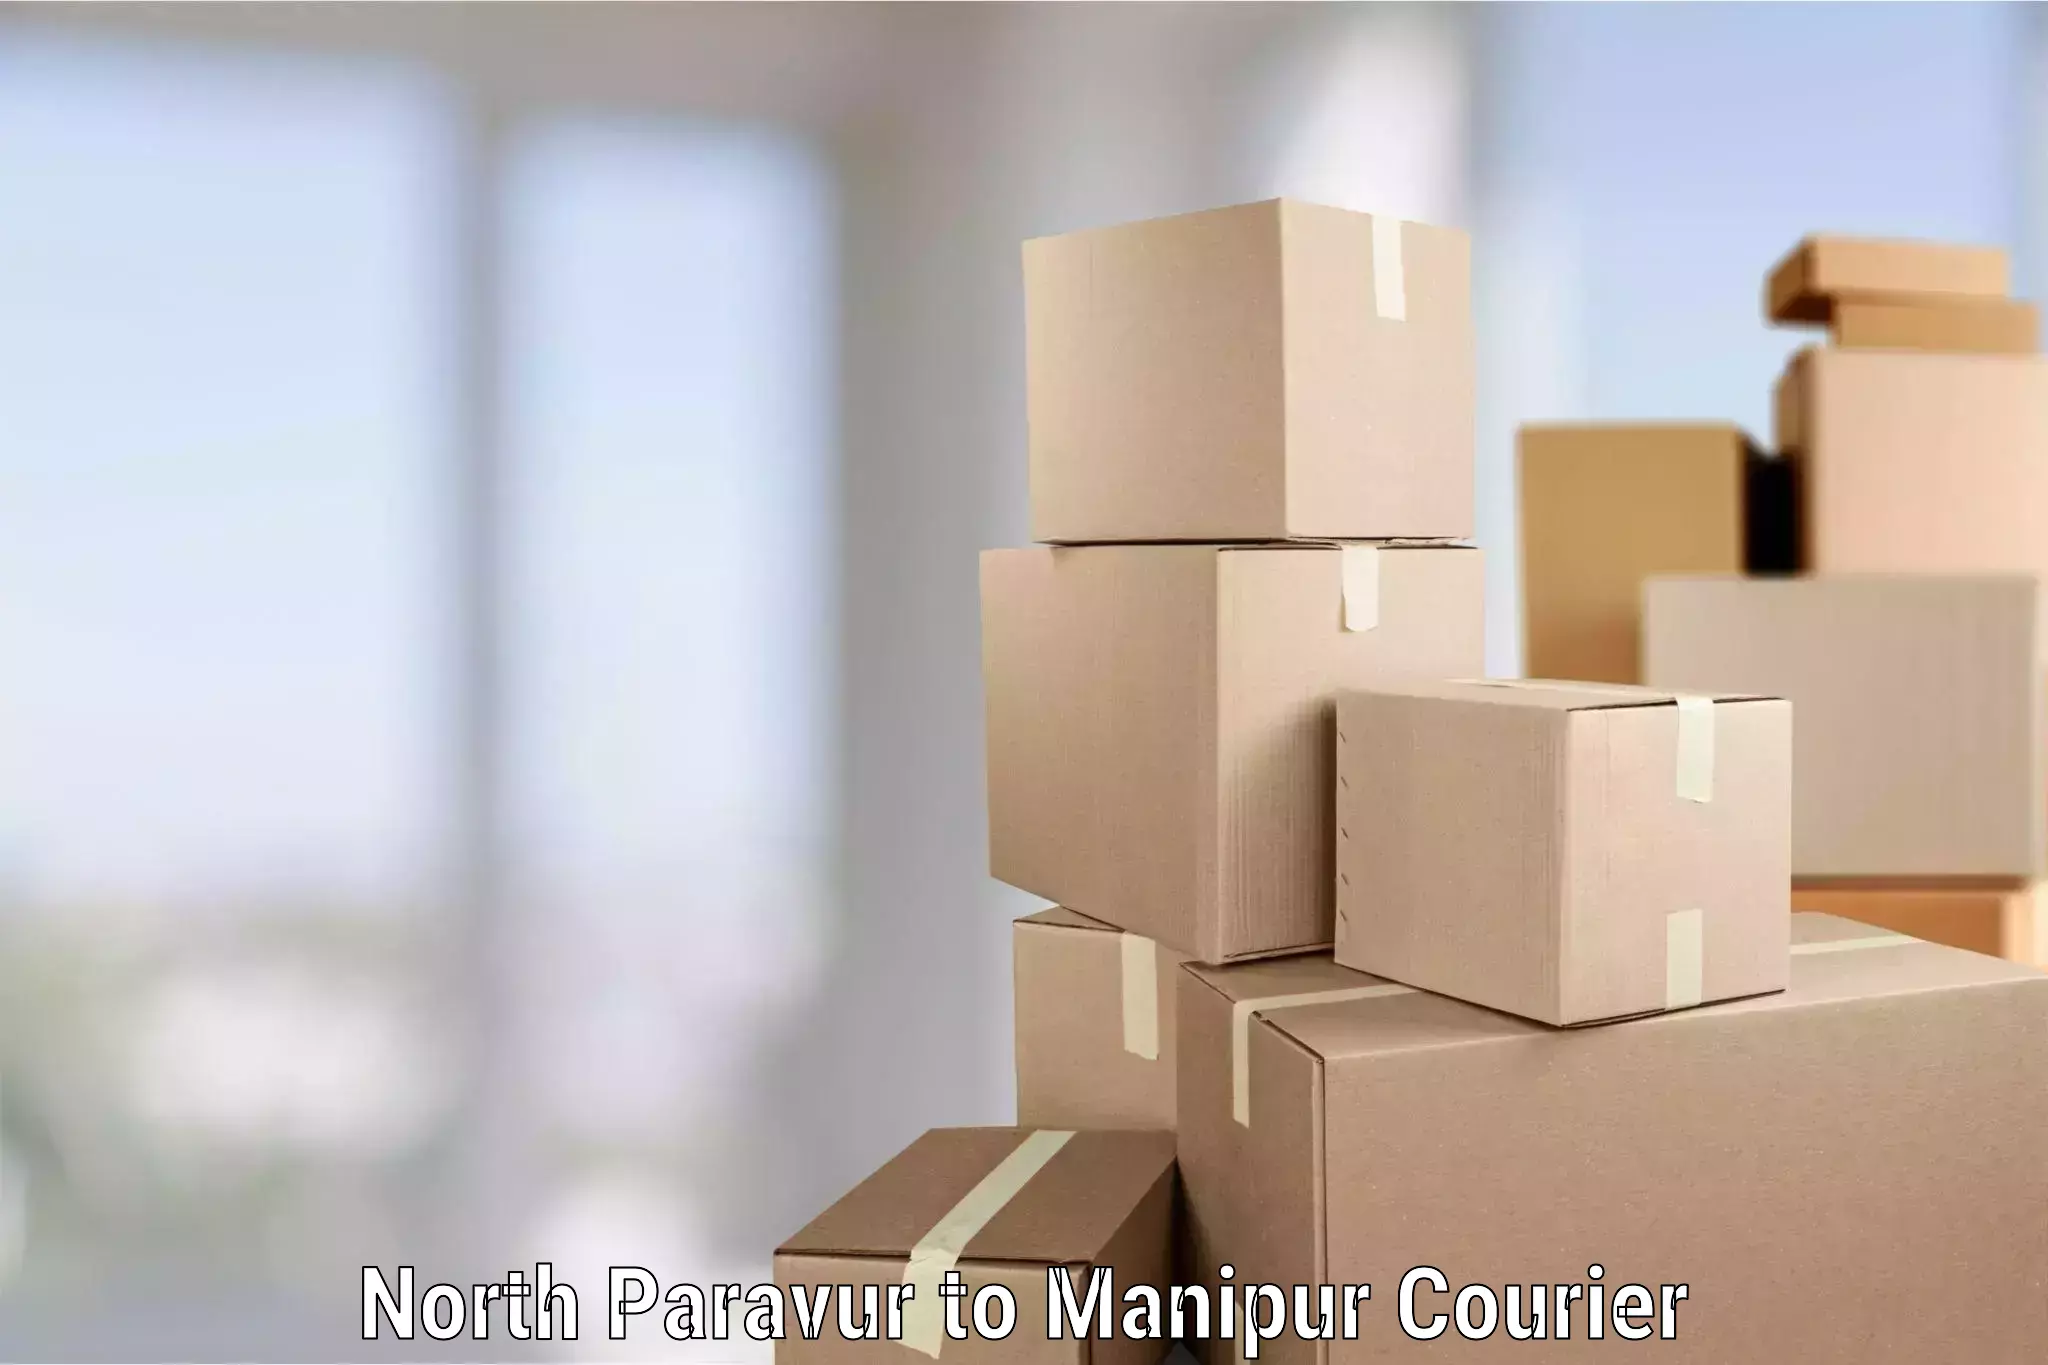 Professional movers and packers North Paravur to Manipur